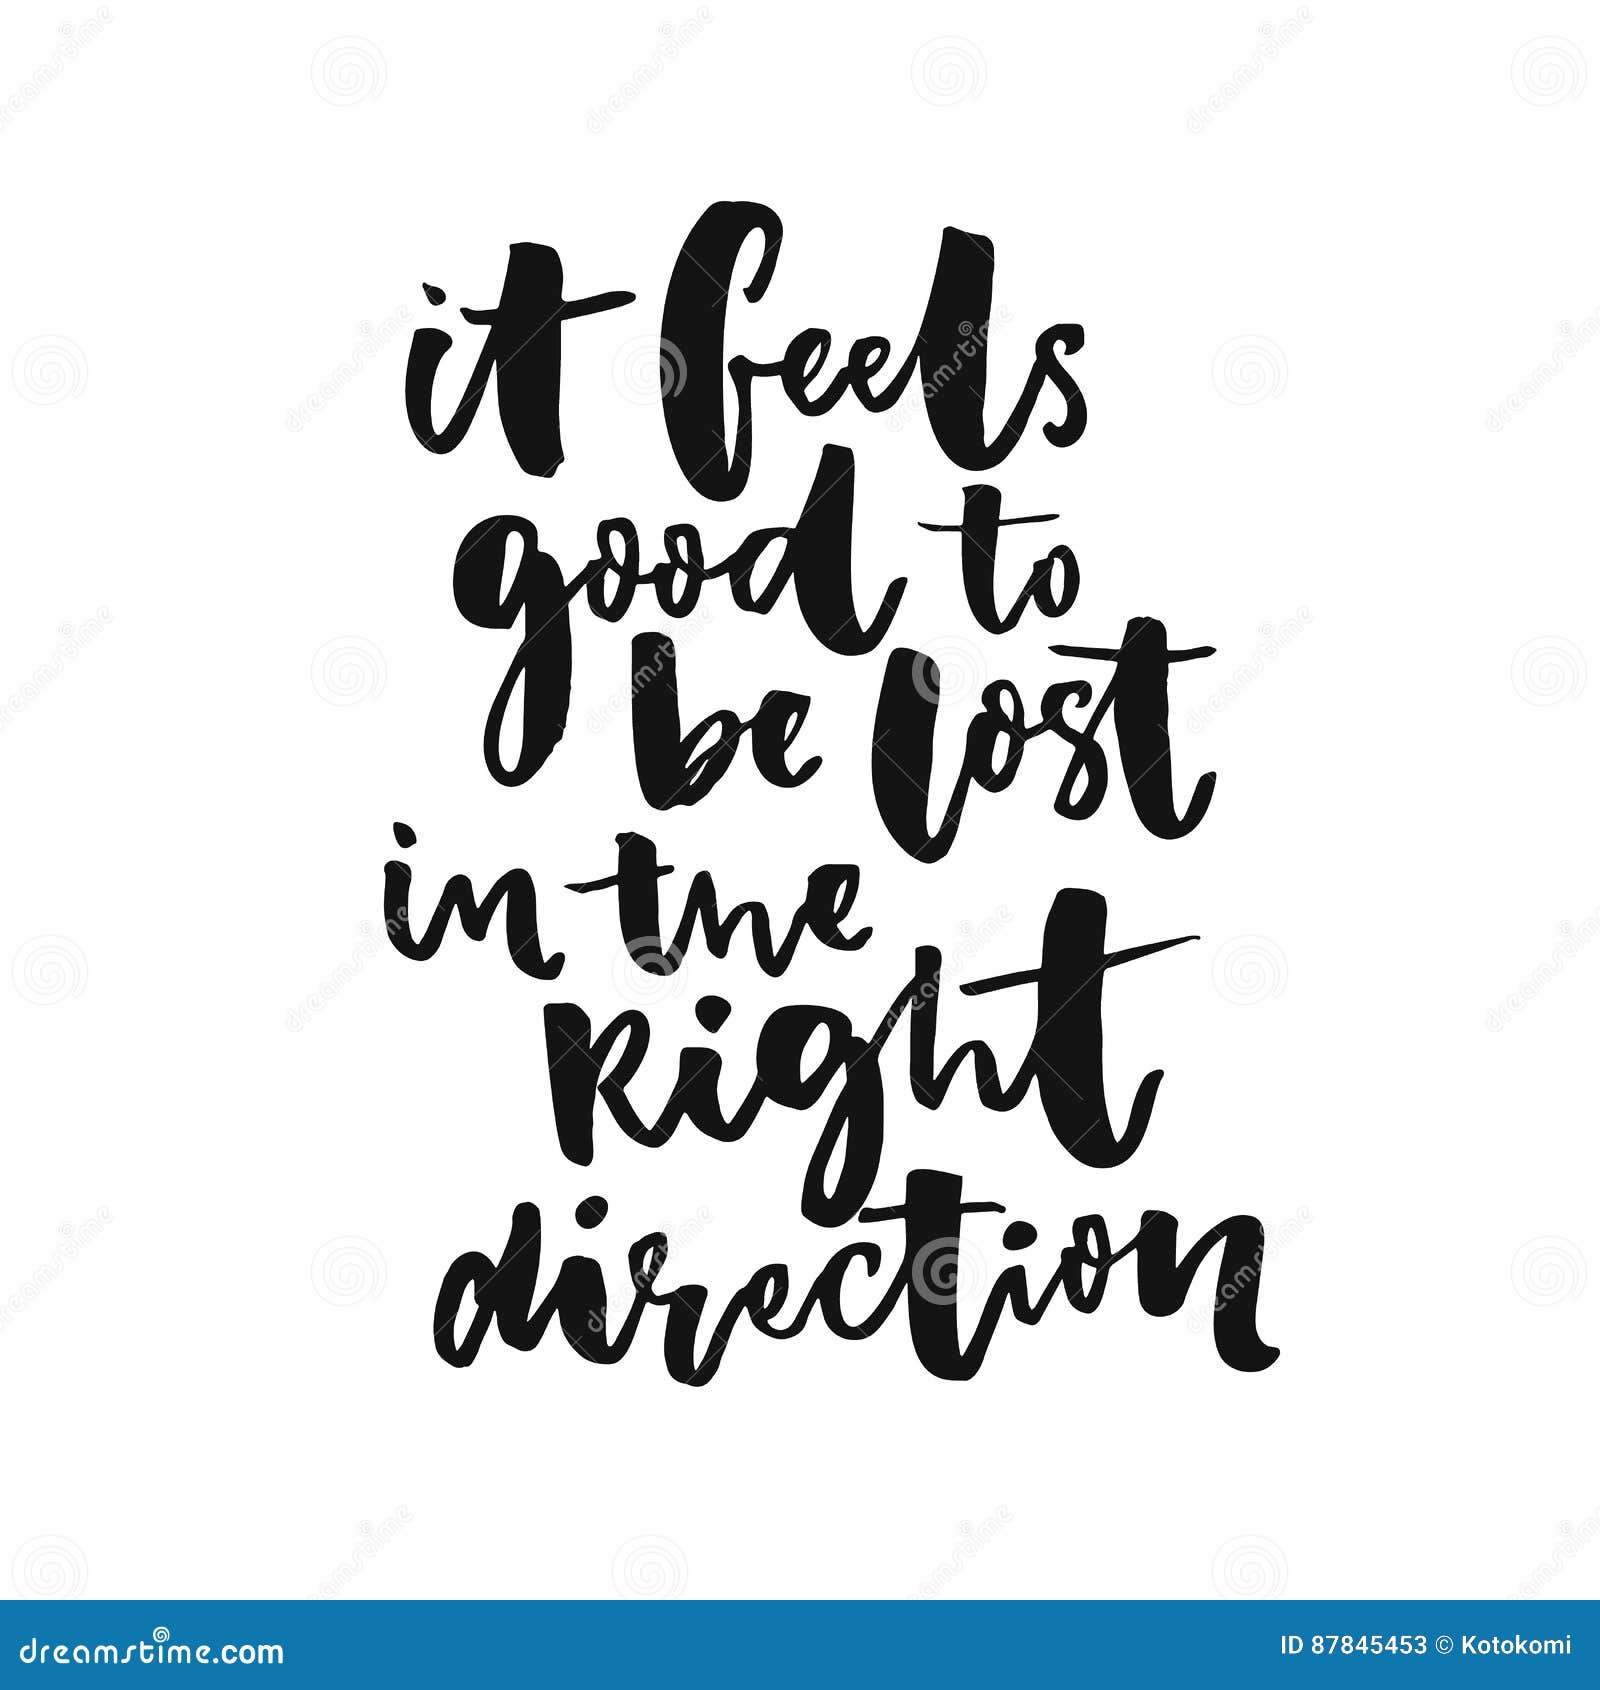 It Feels Good To Be Lost in the Right Direction. Inspiration Saying ...